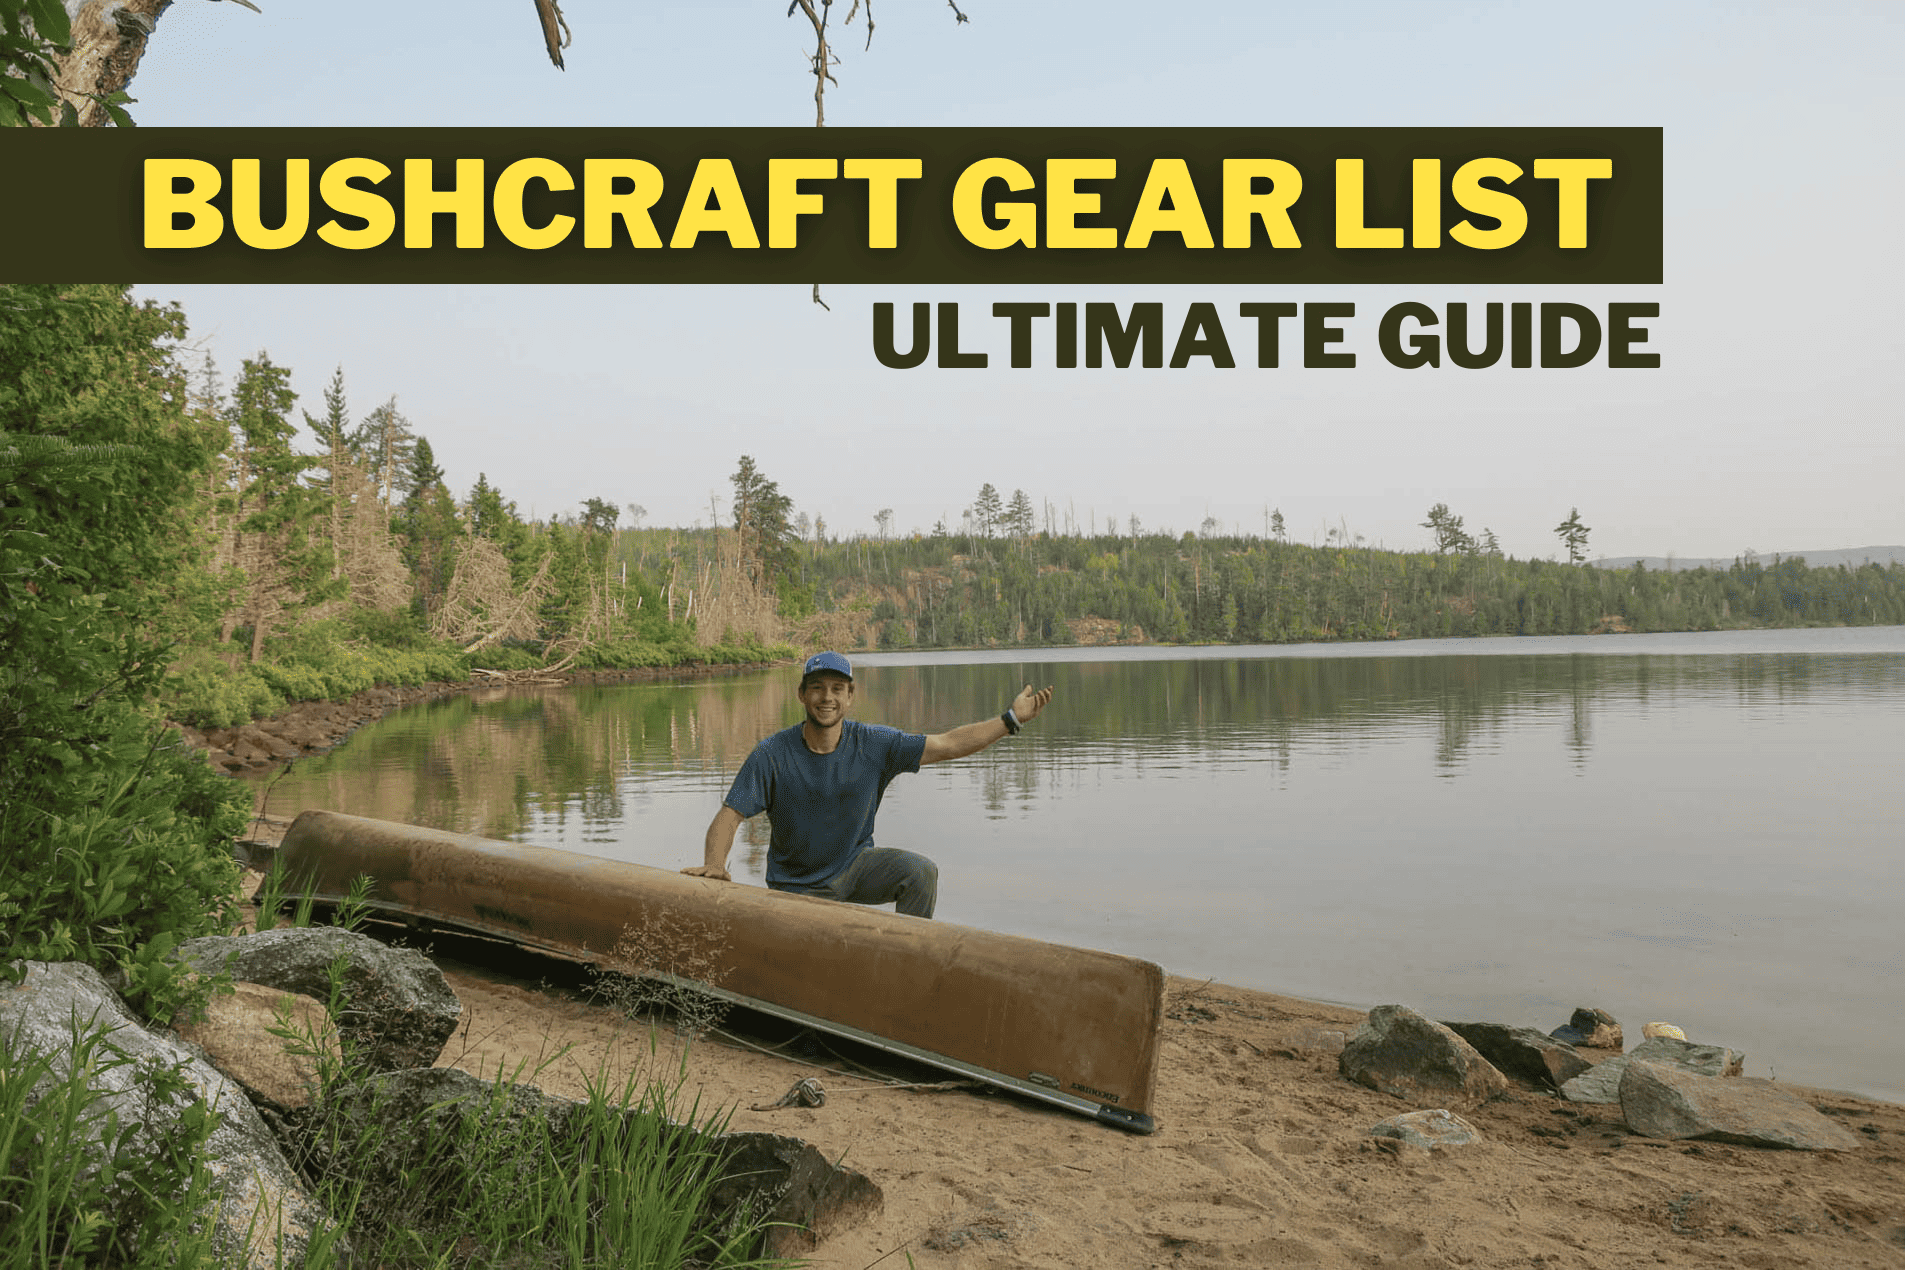 Bushcraft Gear List - Essential Items You Need for Survival